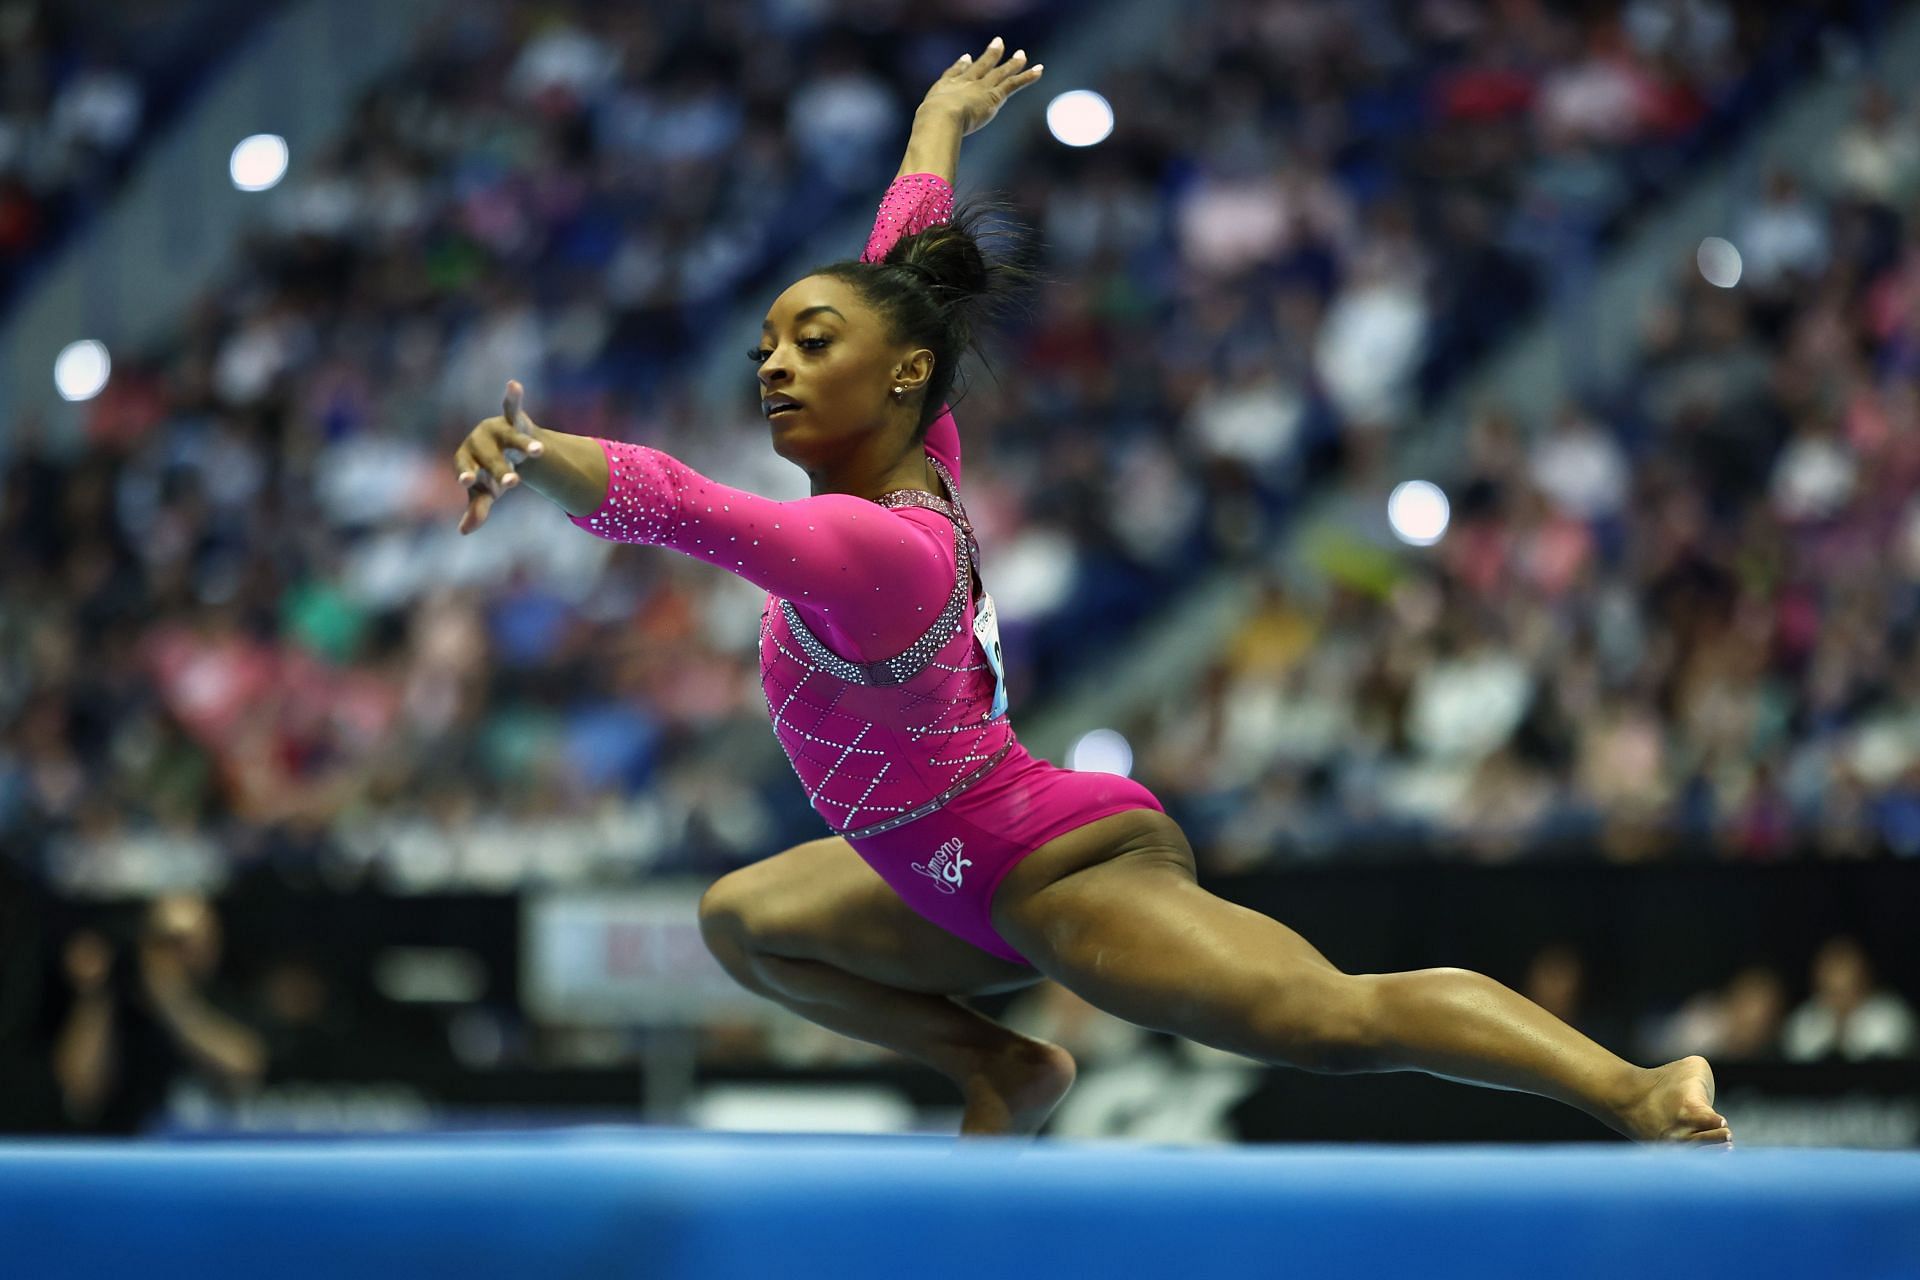 Simone Biles shares a glimpse of the podium training ahead of the